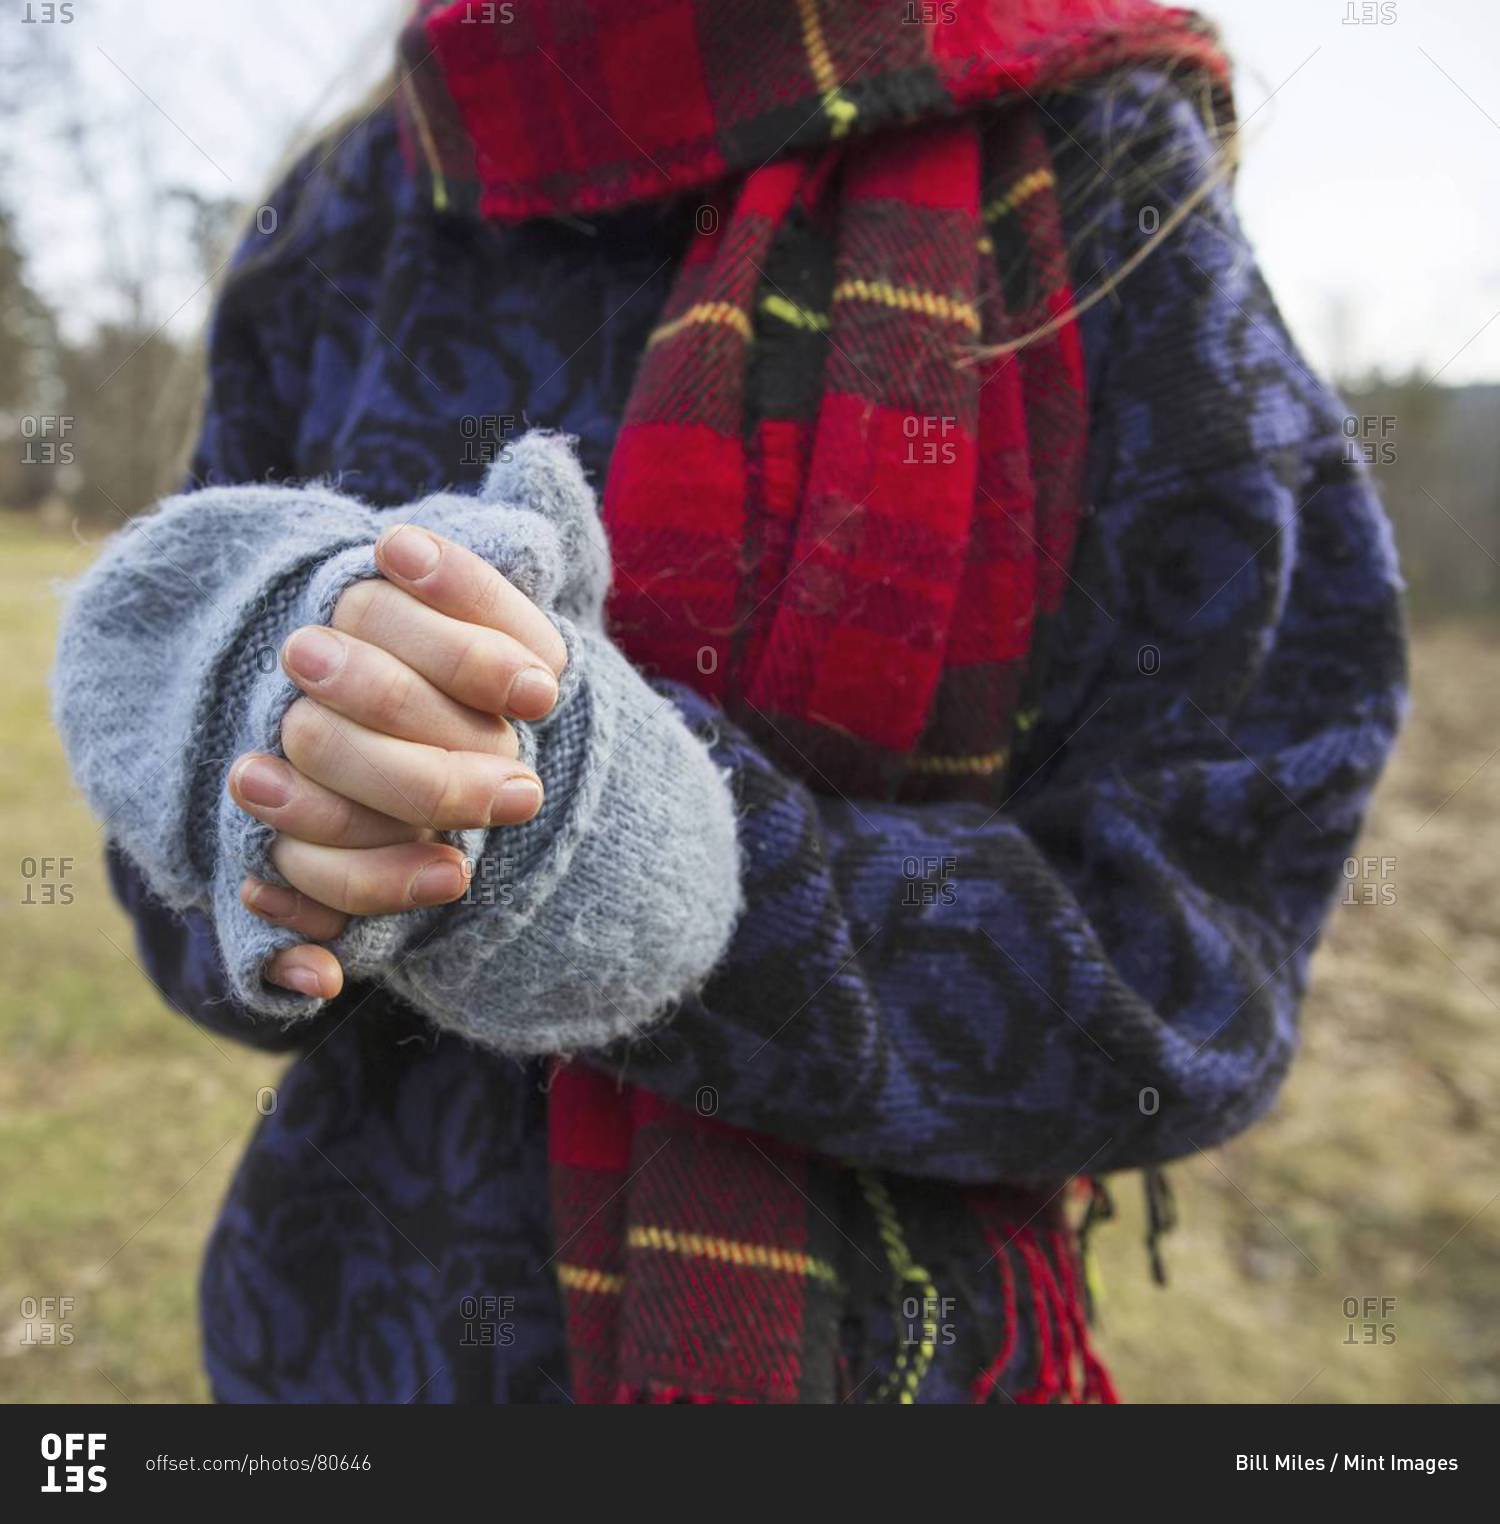 A woman in a tartan scarf and knitted woolen mitts, keeping her hands warm in cold weather.